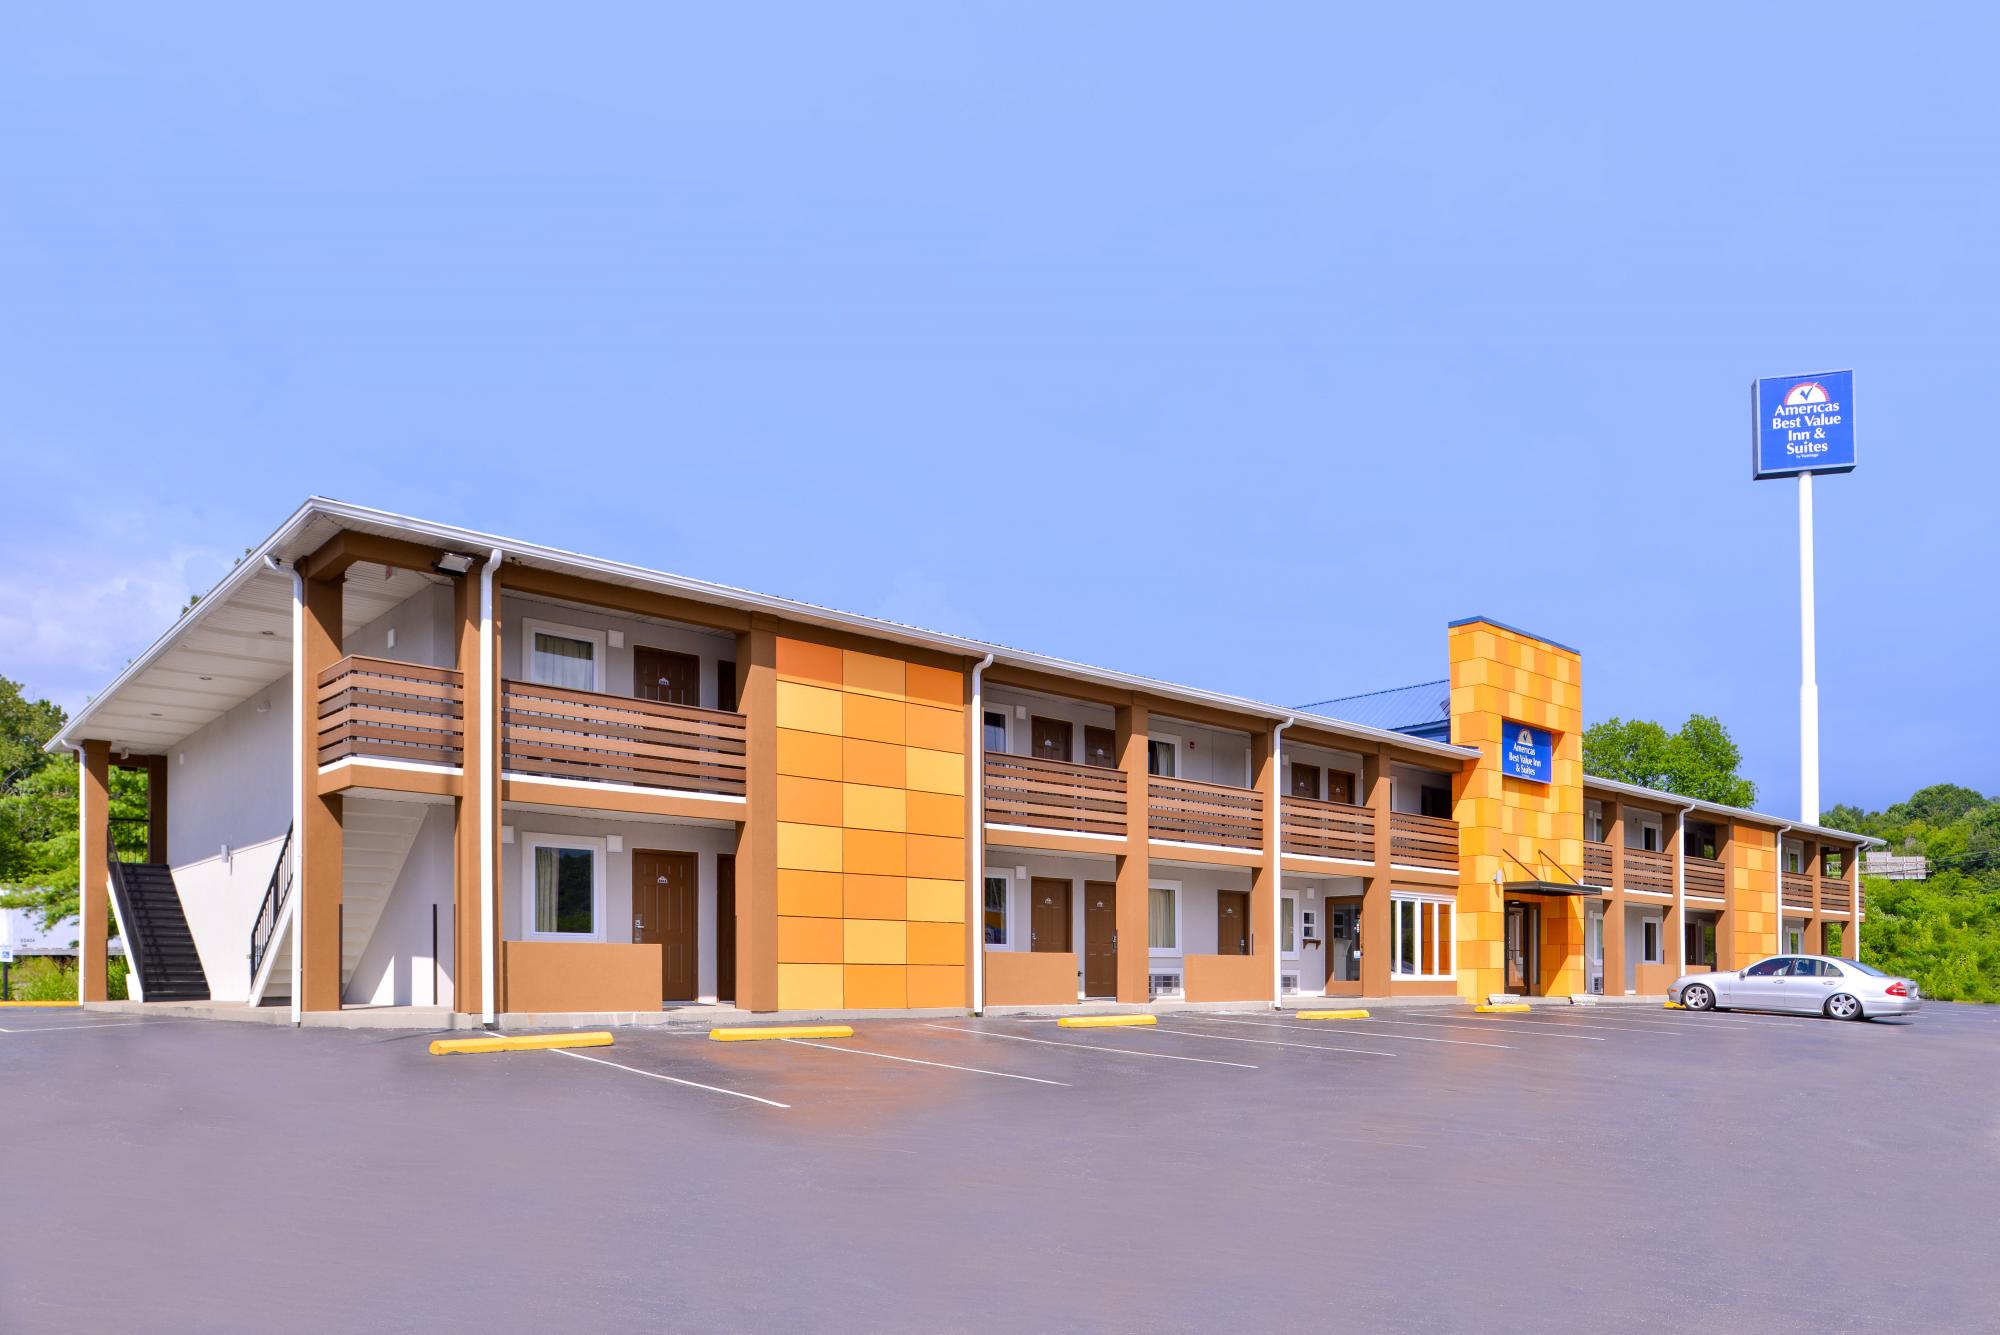 Hotel exterior and parking lot with main lobby entrance